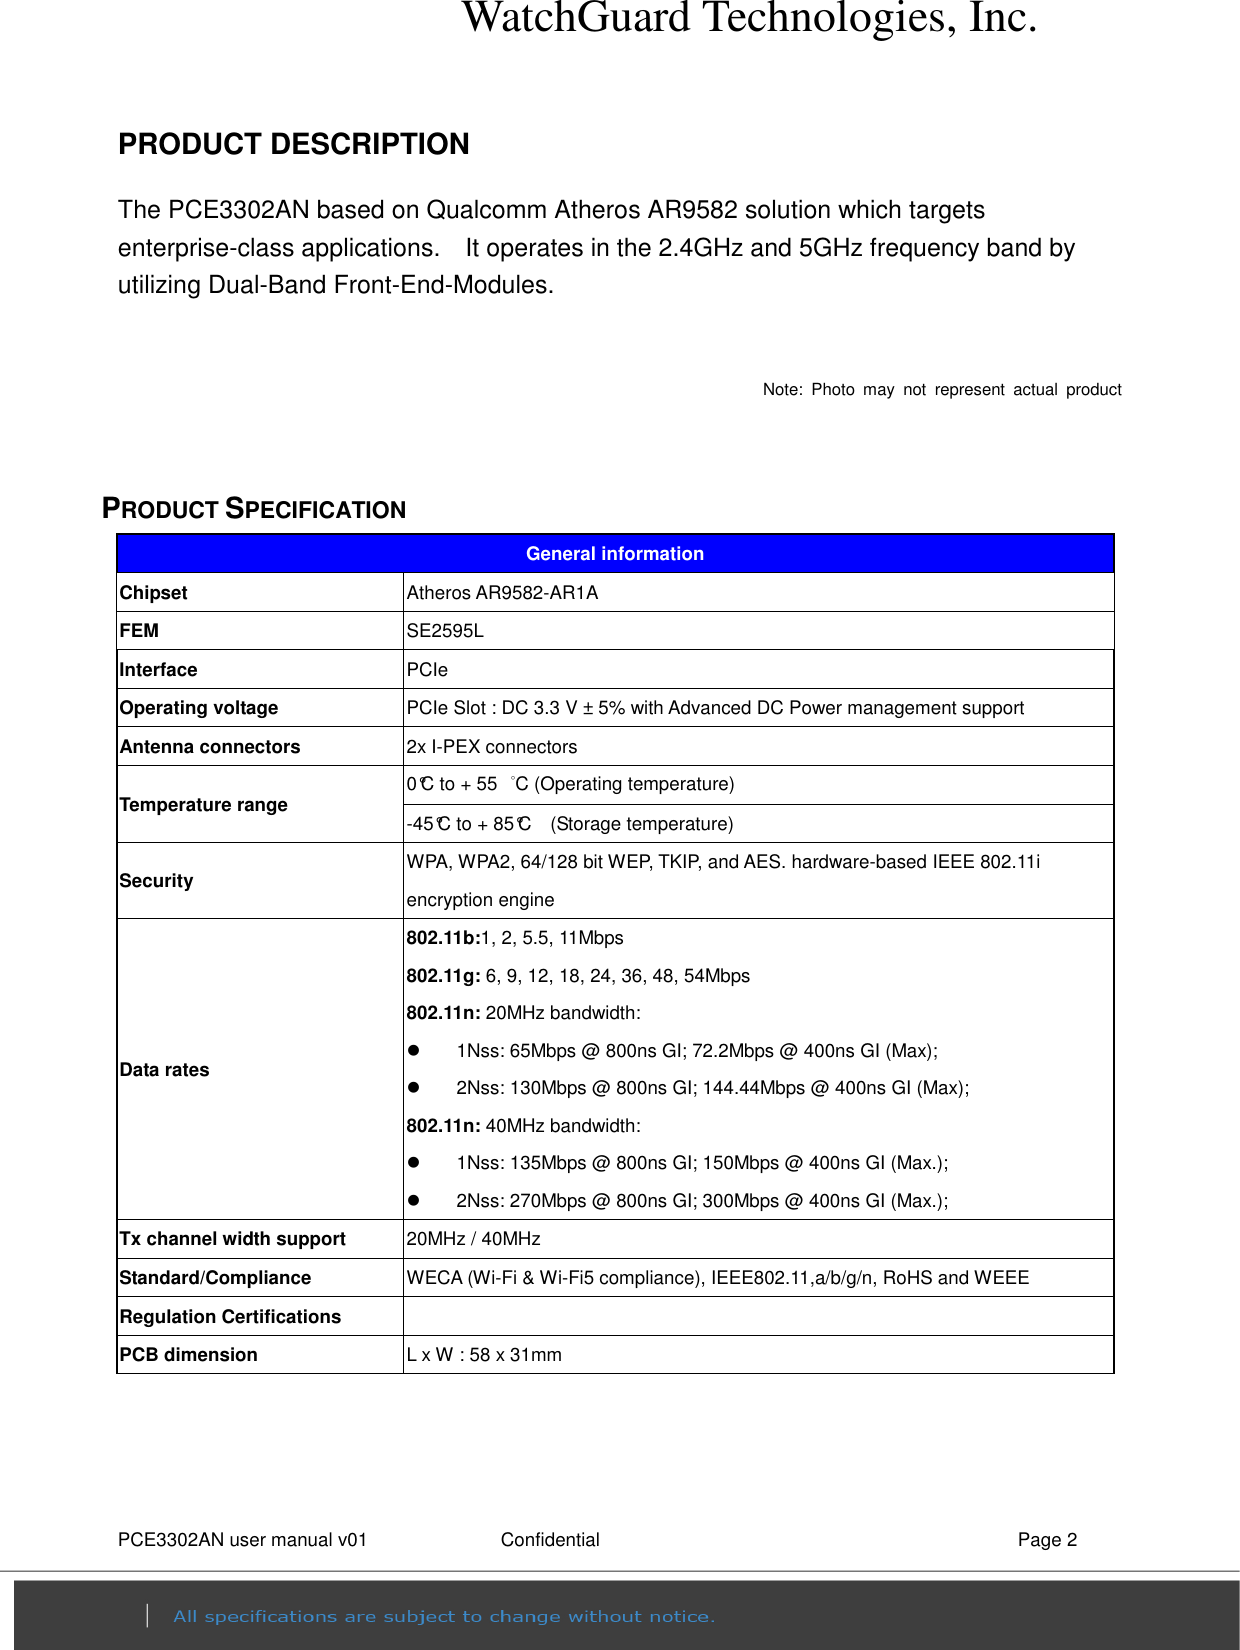 WatchGuard Technologies, Inc. PCE3302AN user manual v01                Confidential    Page 2   PRODUCT DESCRIPTION                       The PCE3302AN based on Qualcomm Atheros AR9582 solution which targets enterprise-class applications.    It operates in the 2.4GHz and 5GHz frequency band by utilizing Dual-Band Front-End-Modules.  Note:  Photo  may  not  represent  actual  product   PRODUCT SPECIFICATION General information Chipset  Atheros AR9582-AR1A FEM  SE2595L Interface  PCIe   Operating voltage  PCIe Slot : DC 3.3 V ± 5% with Advanced DC Power management support   Antenna connectors  2x I-PEX connectors   Temperature range  0°C to + 55  °C (Operating temperature)   -45°C to + 85°C    (Storage temperature)   Security  WPA, WPA2, 64/128 bit WEP, TKIP, and AES. hardware-based IEEE 802.11i encryption engine   Data rates 802.11b:1, 2, 5.5, 11Mbps 802.11g: 6, 9, 12, 18, 24, 36, 48, 54Mbps 802.11n: 20MHz bandwidth:   1Nss: 65Mbps @ 800ns GI; 72.2Mbps @ 400ns GI (Max);   2Nss: 130Mbps @ 800ns GI; 144.44Mbps @ 400ns GI (Max); 802.11n: 40MHz bandwidth:   1Nss: 135Mbps @ 800ns GI; 150Mbps @ 400ns GI (Max.);   2Nss: 270Mbps @ 800ns GI; 300Mbps @ 400ns GI (Max.); Tx channel width support  20MHz / 40MHz Standard/Compliance  WECA (Wi-Fi &amp; Wi-Fi5 compliance), IEEE802.11,a/b/g/n, RoHS and WEEE Regulation Certifications   PCB dimension  L x W : 58 x 31mm 